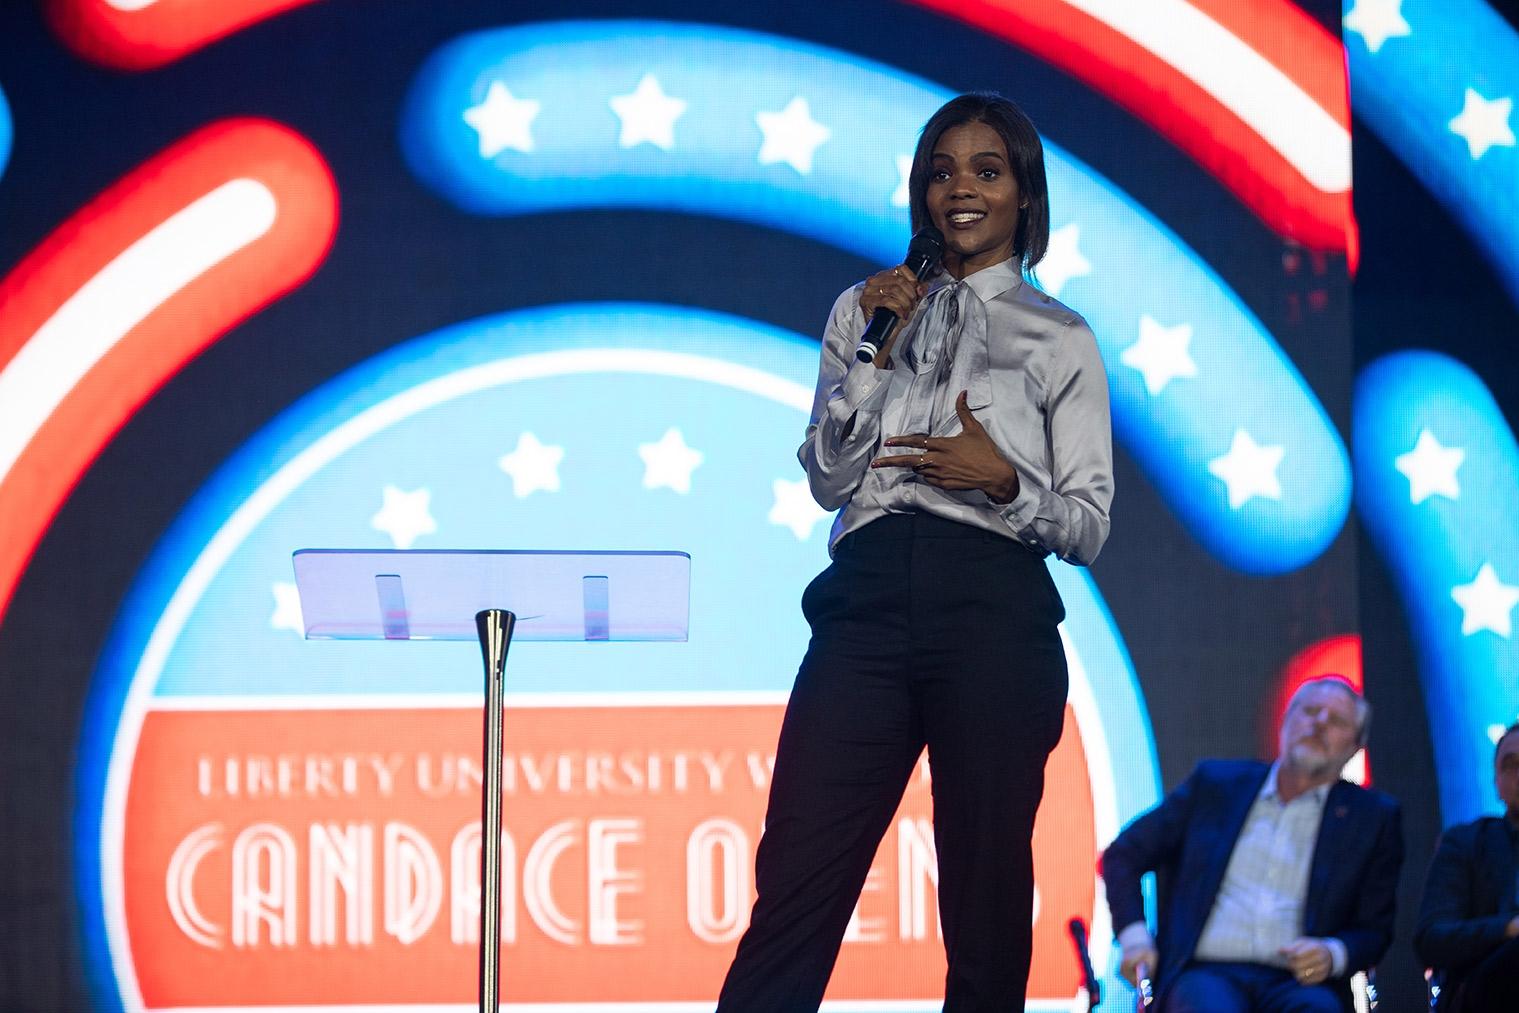 Media personality Candace Owens inspires students to speak